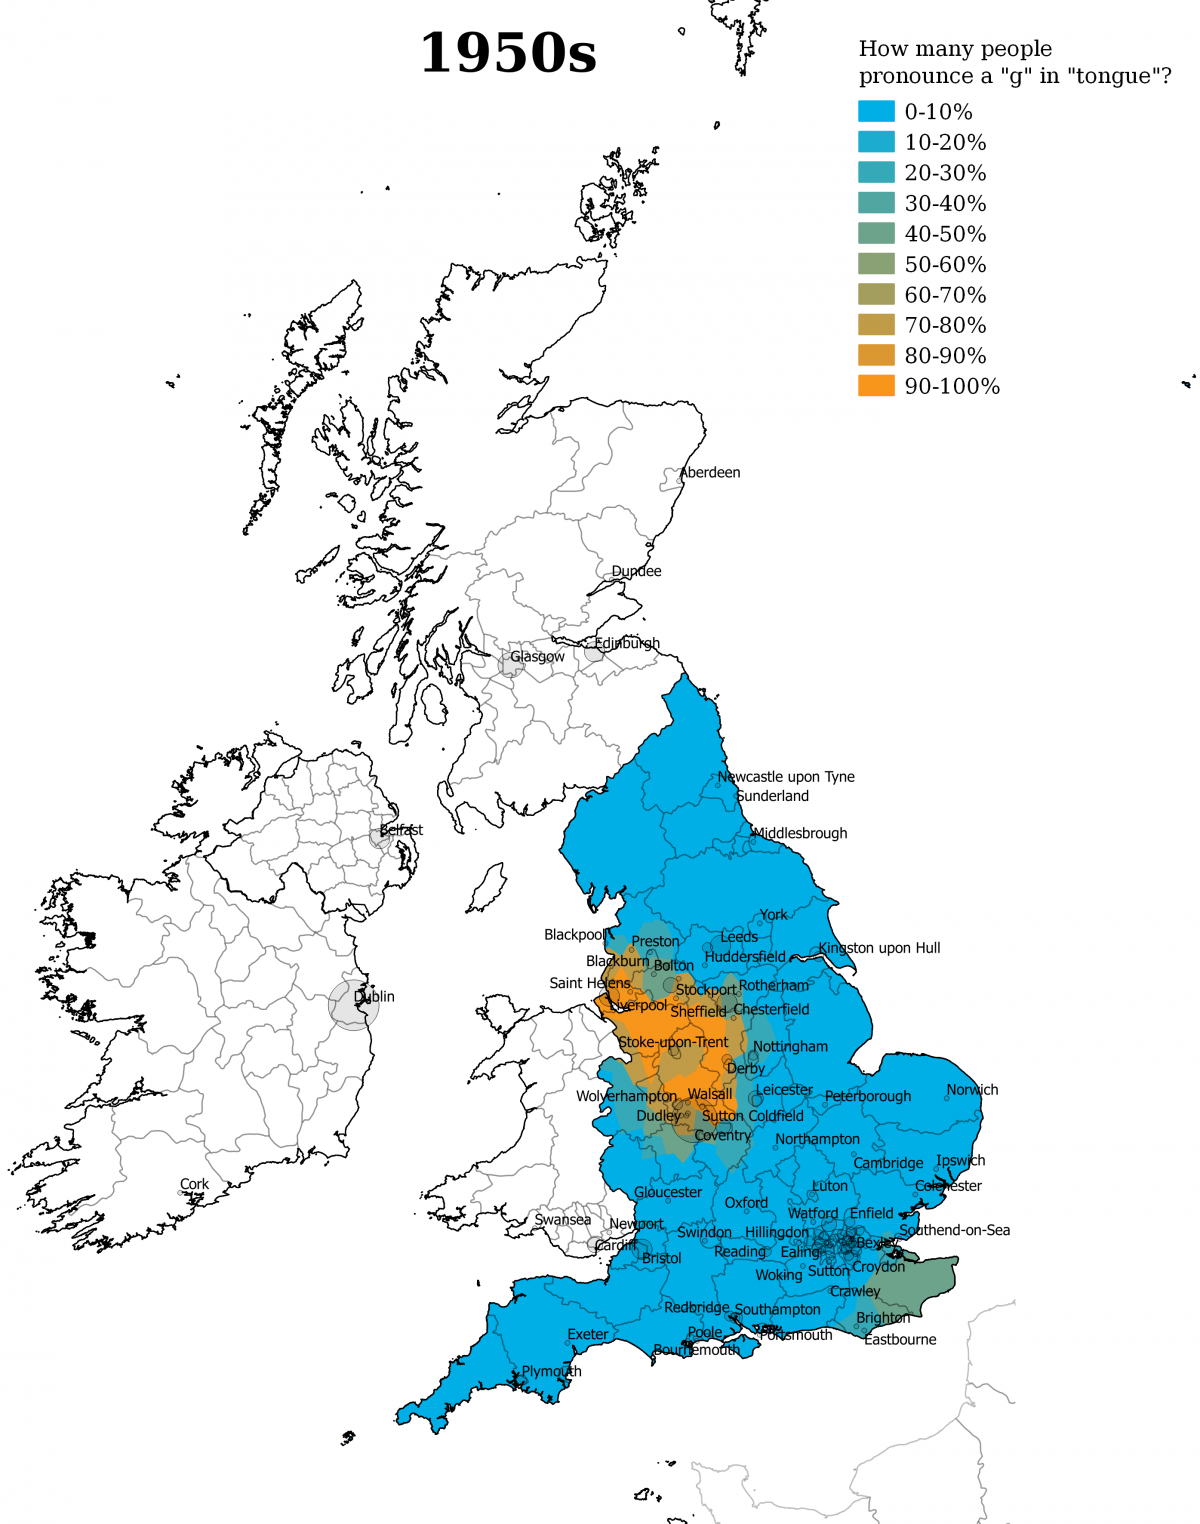 Топик: Regional variation of pronunciation in the south-west of England